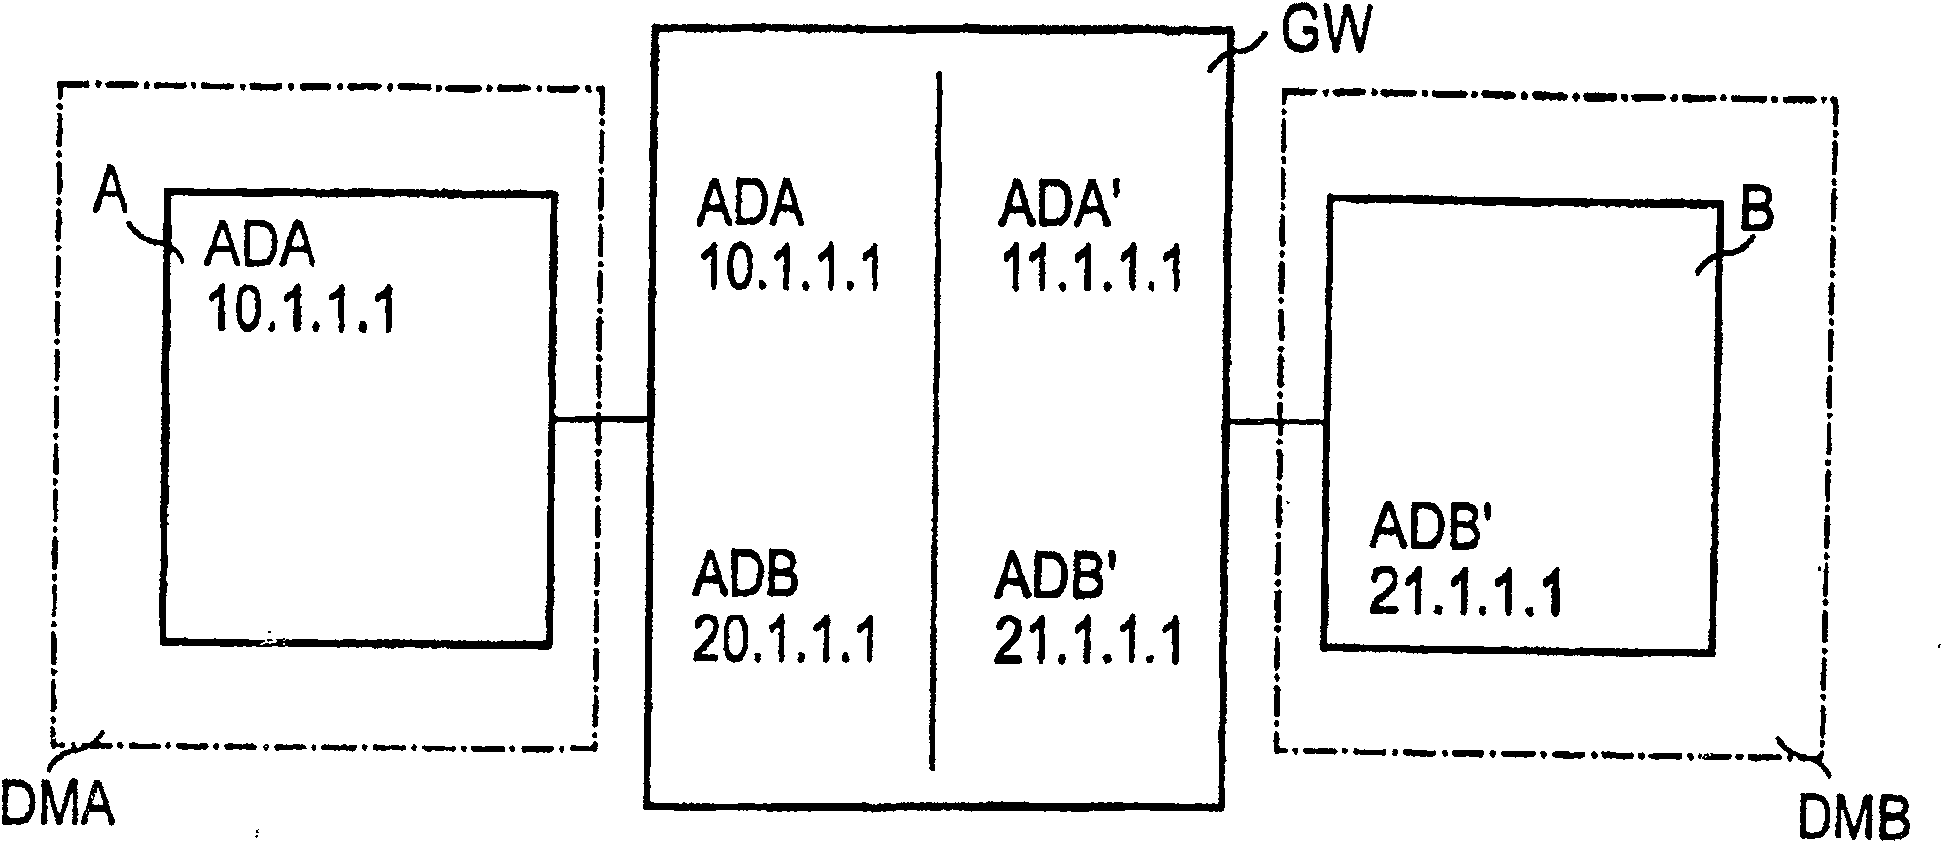 Method for data exchange between network elements in networks with differing address ranges